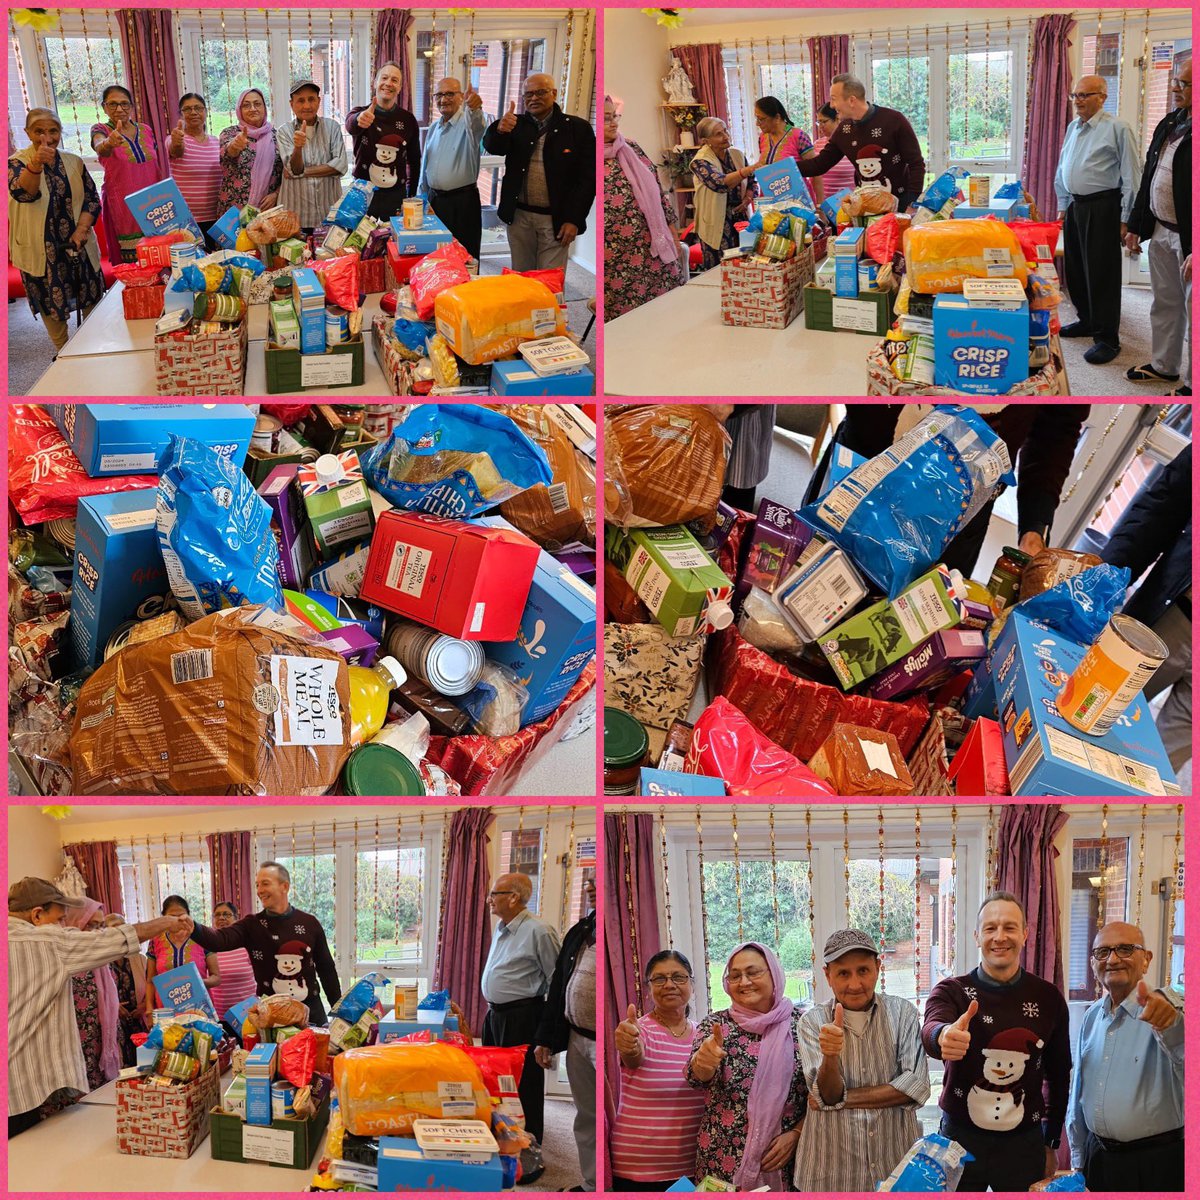 A heartfelt shoutout to @RusheyMeadAcad Your amazing hampers lit up our shelter scheme. Residents are truly touched, & over the moon! Thank you for making this season brighter for everyone 🙏🏼♥️ #CommunityKindness #Grateful #RusheyMeadAcademyMagic